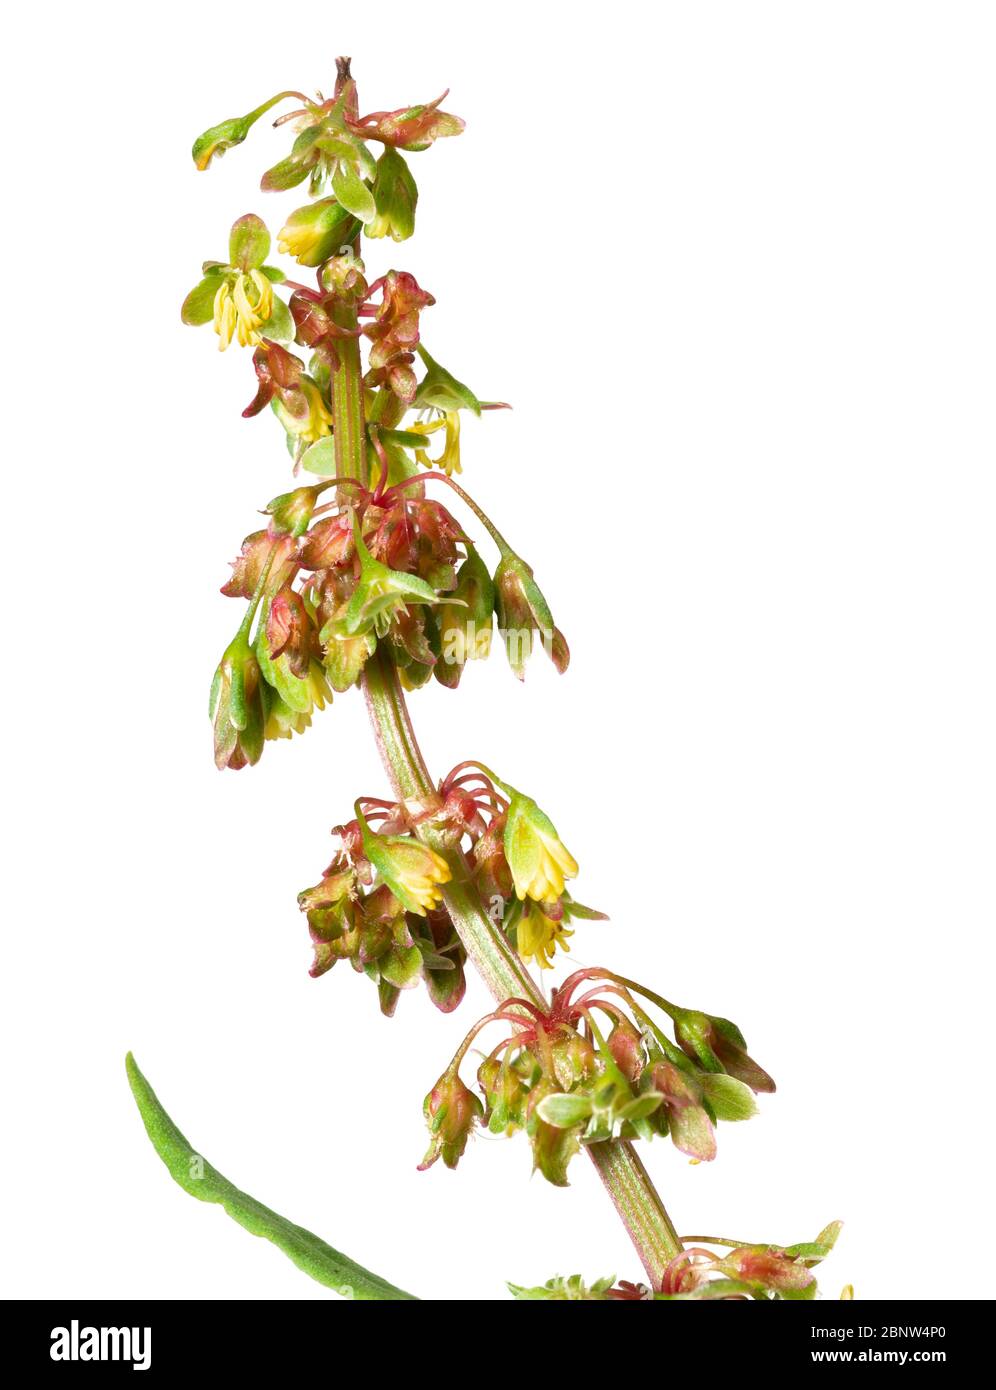 Close up of single flower spike of clustered dock, Rumex conglomeratus, on a white background Stock Photo